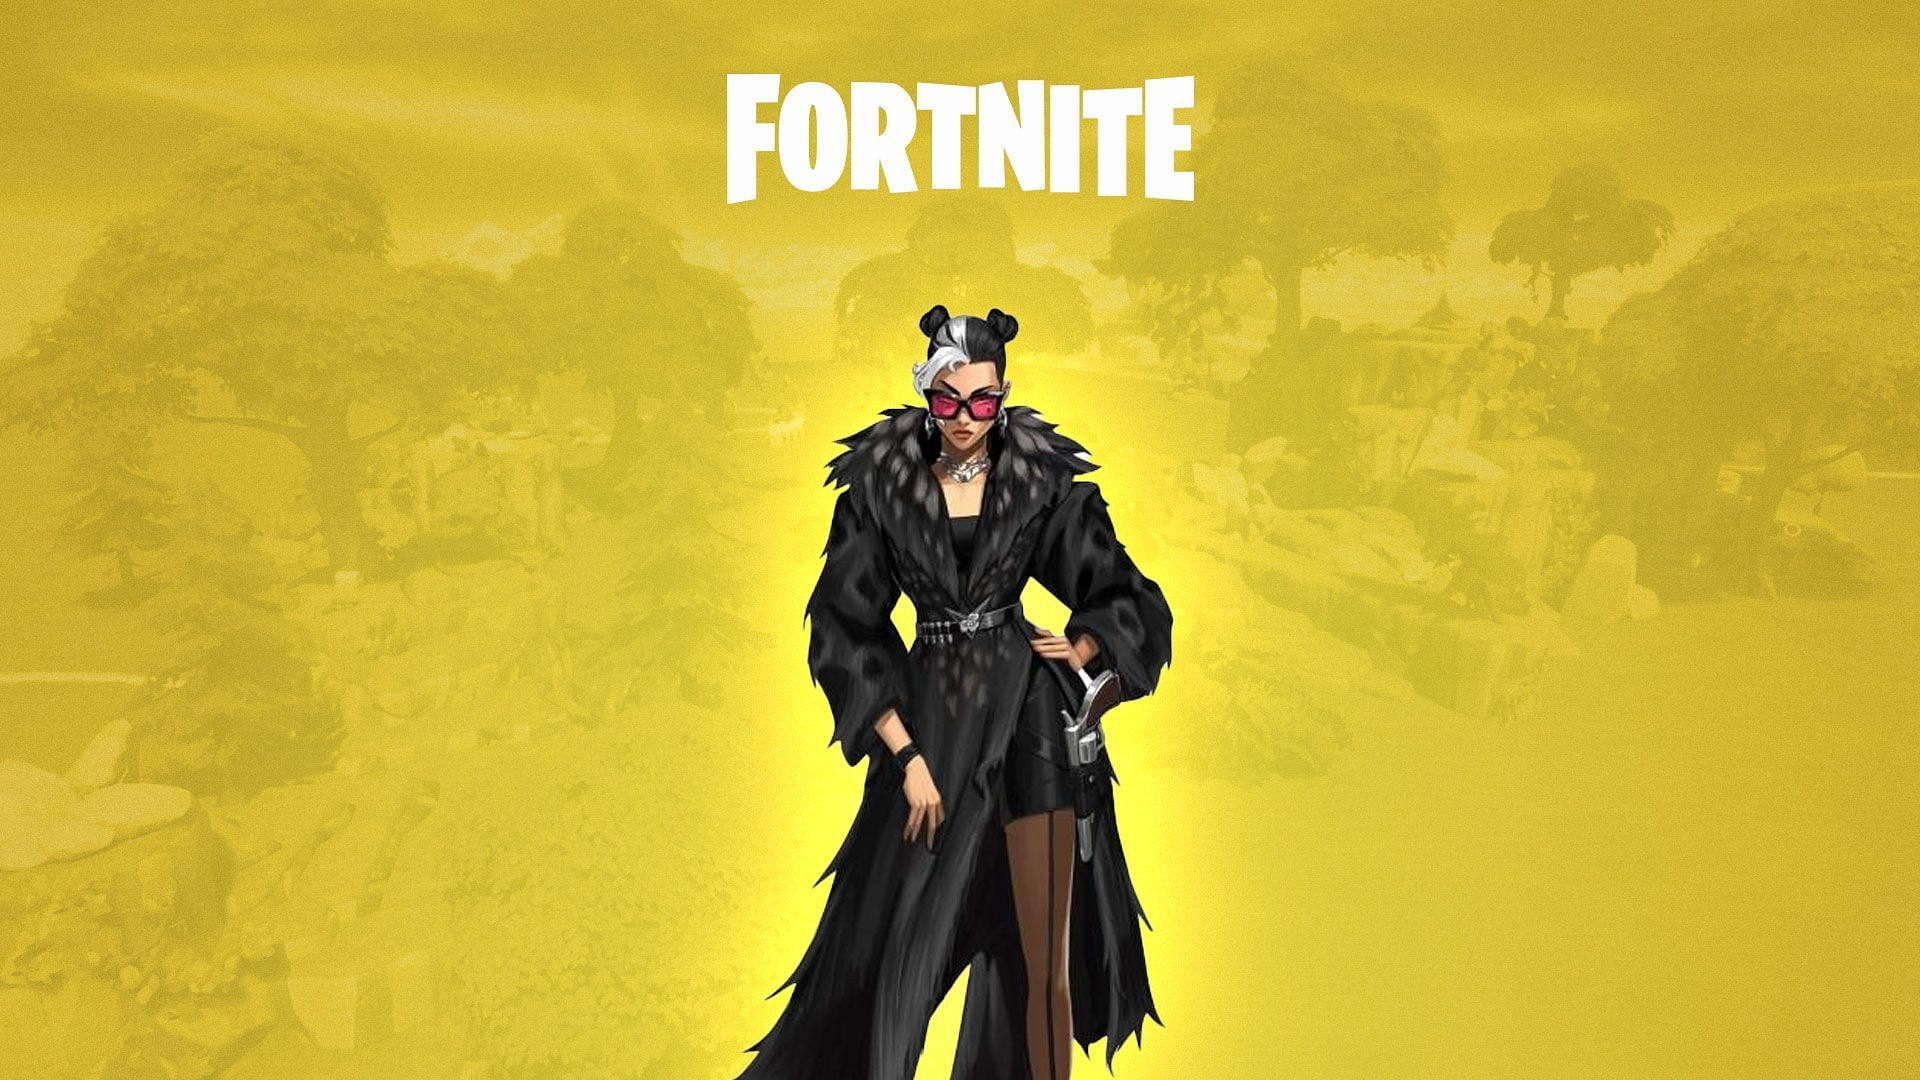 Geno may have a new variant in Fortnite and she slays (Image via Epic Games/Fortnite)